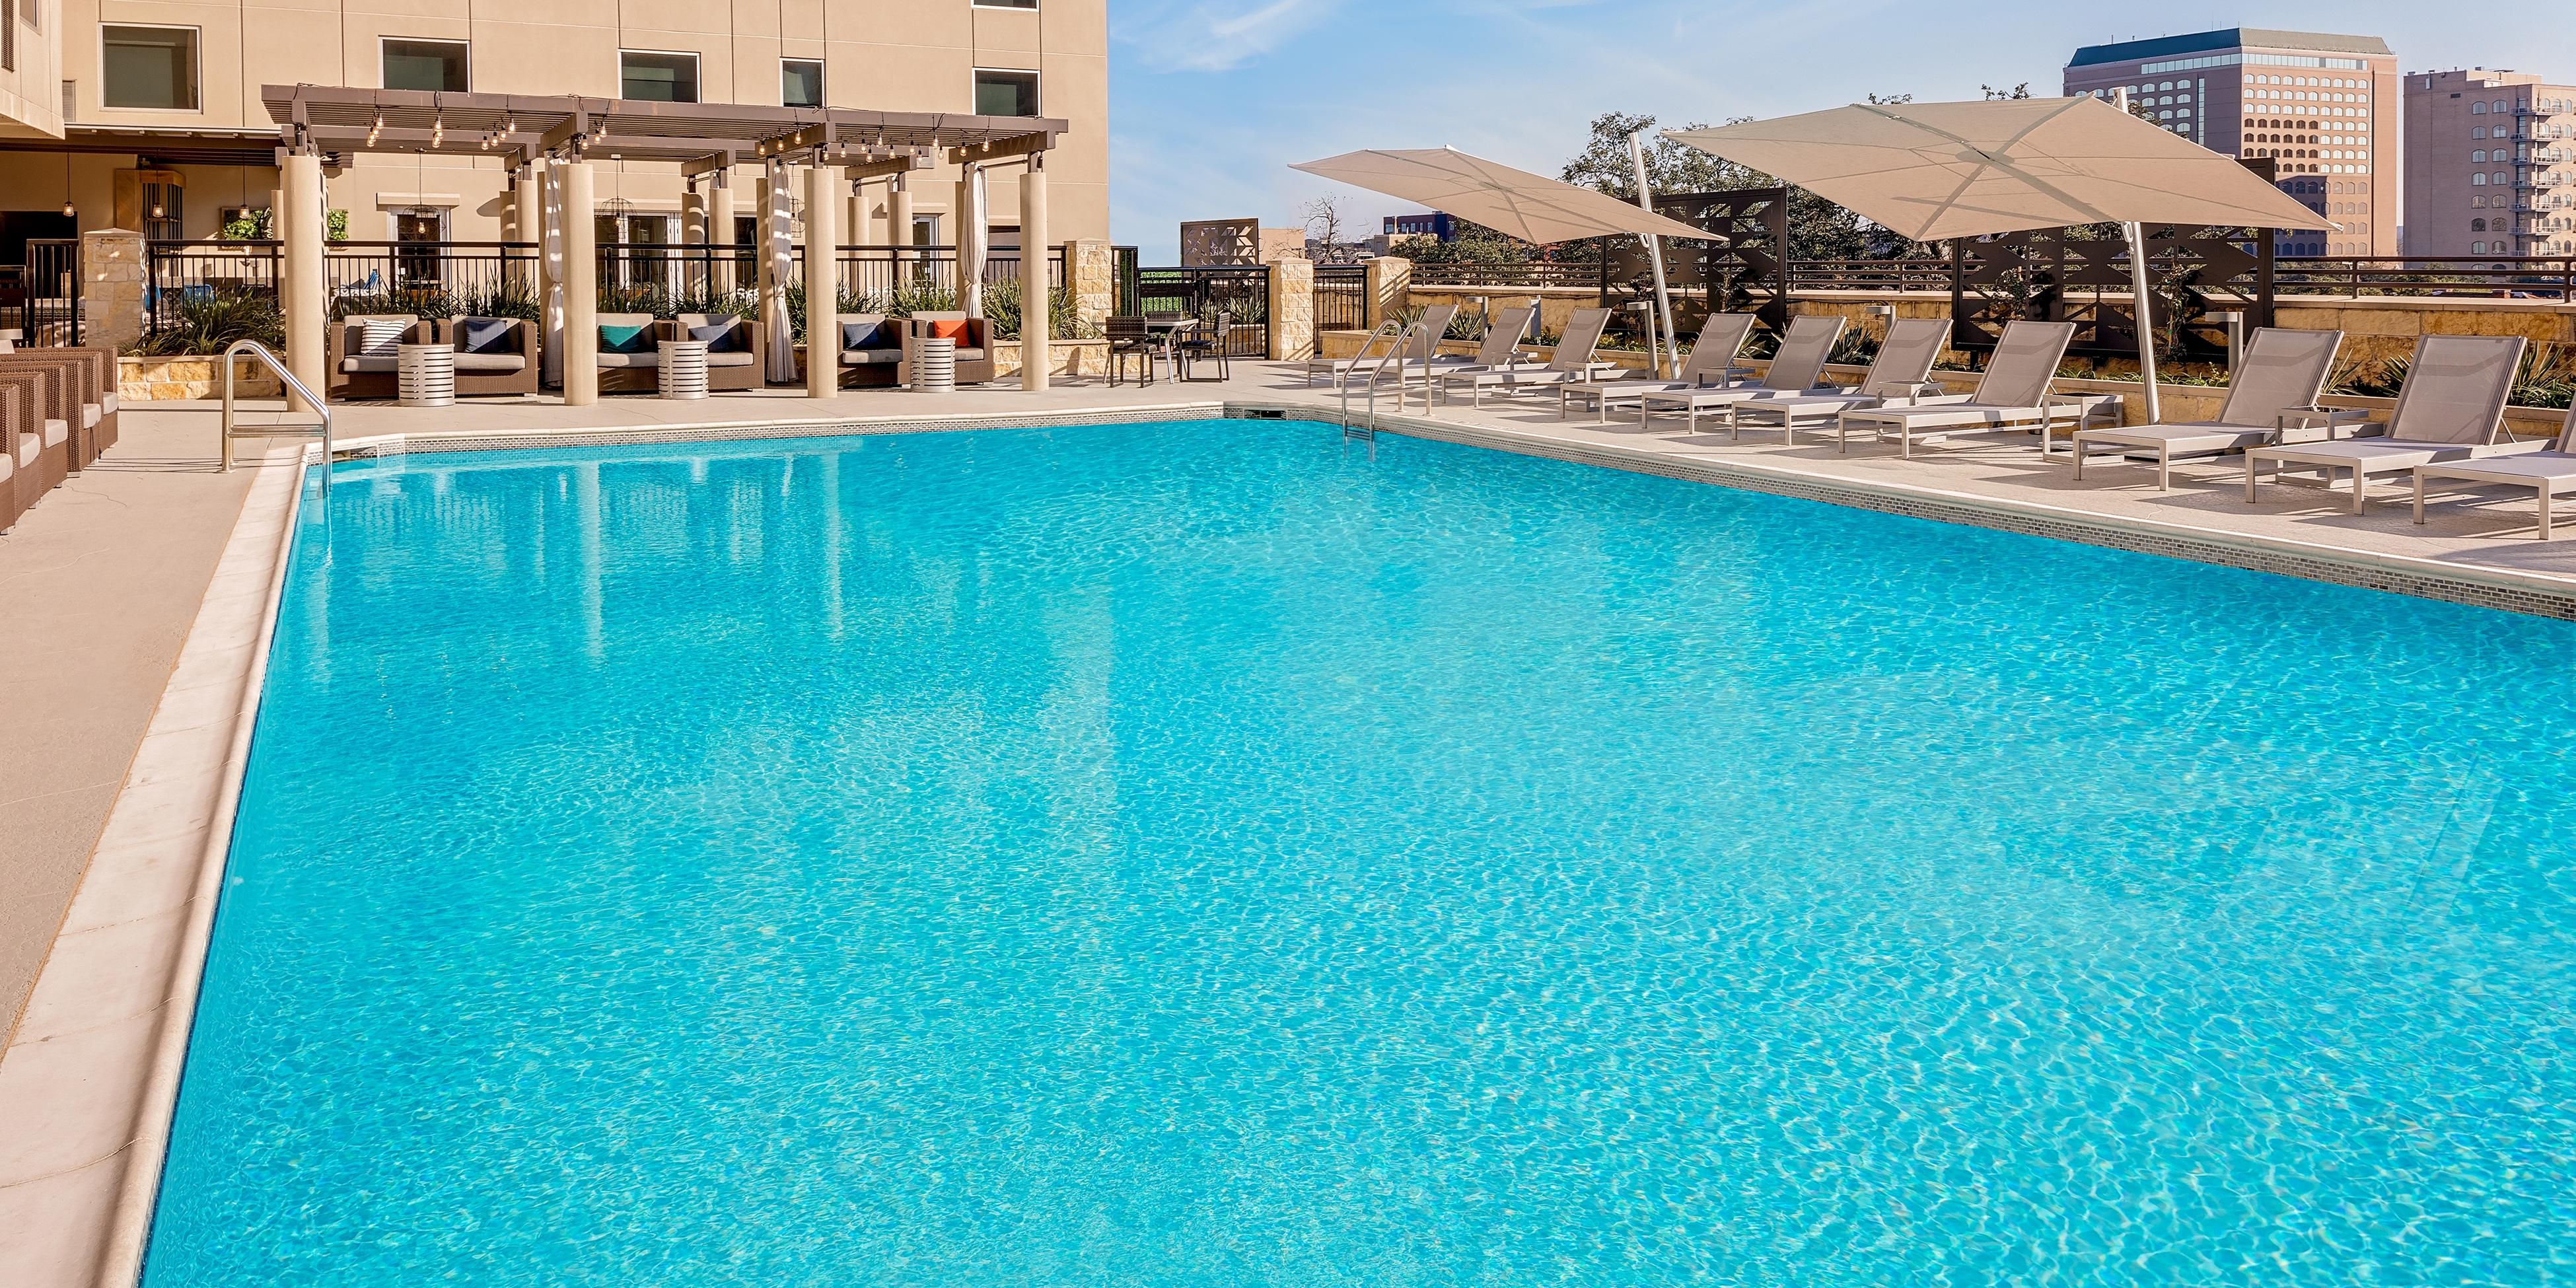 You are going to love our heated outdoor swimming pool! Take in beautiful views of Downtown Austin as you relax by our balcony pool. Open all year and every day from 6:00 AM to 10:00 PM.